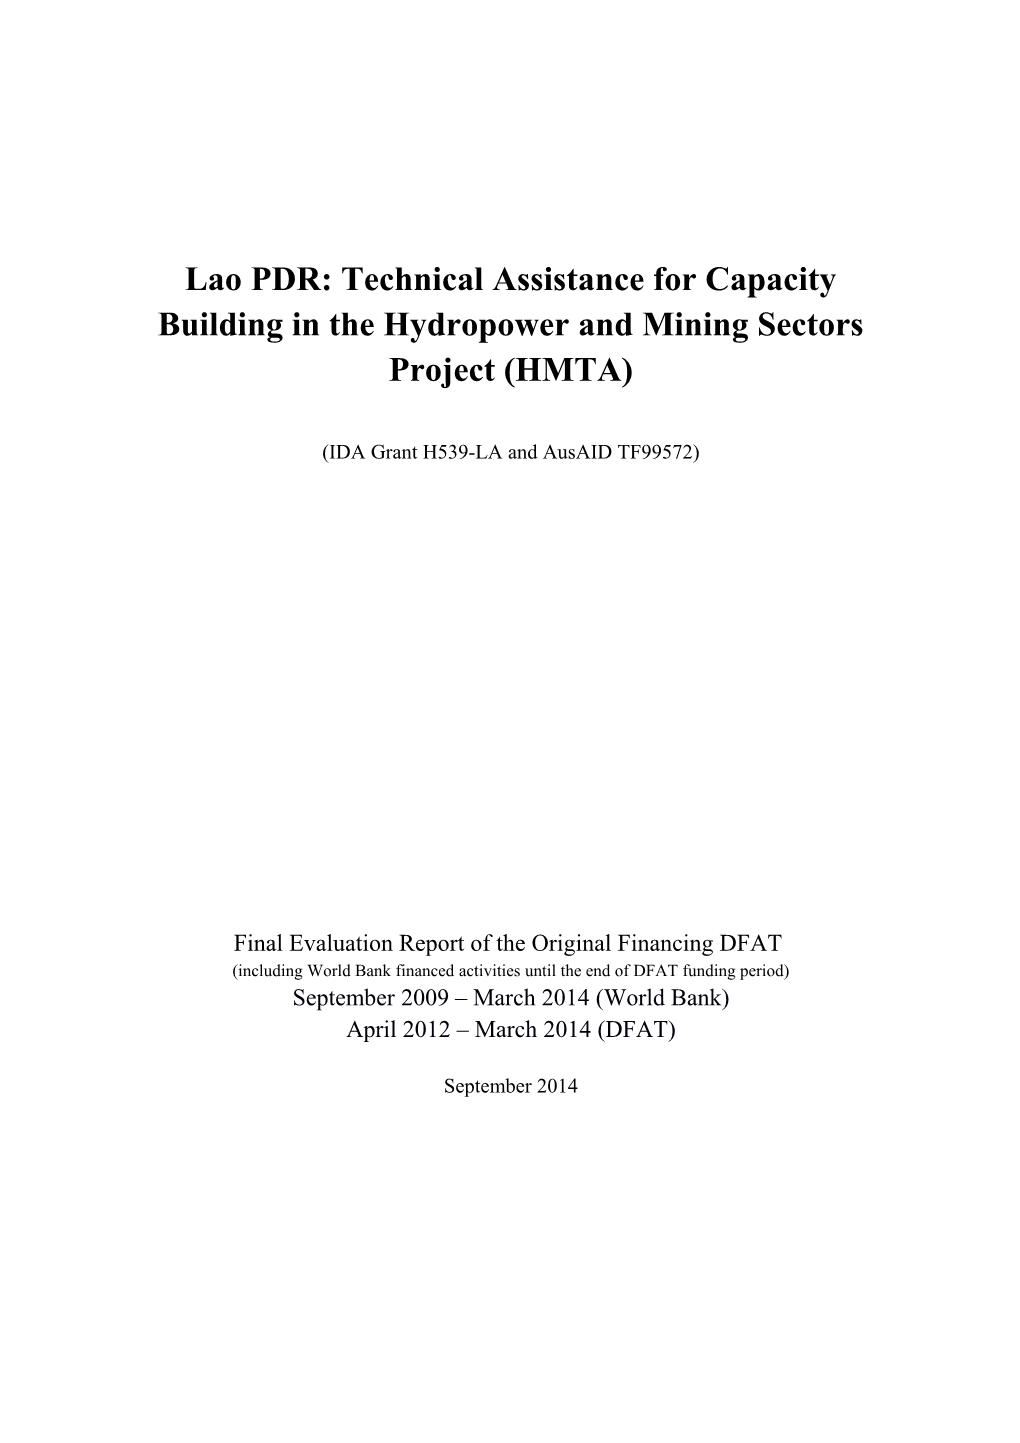 Final Evaluation Report of the Original Financing DFAT